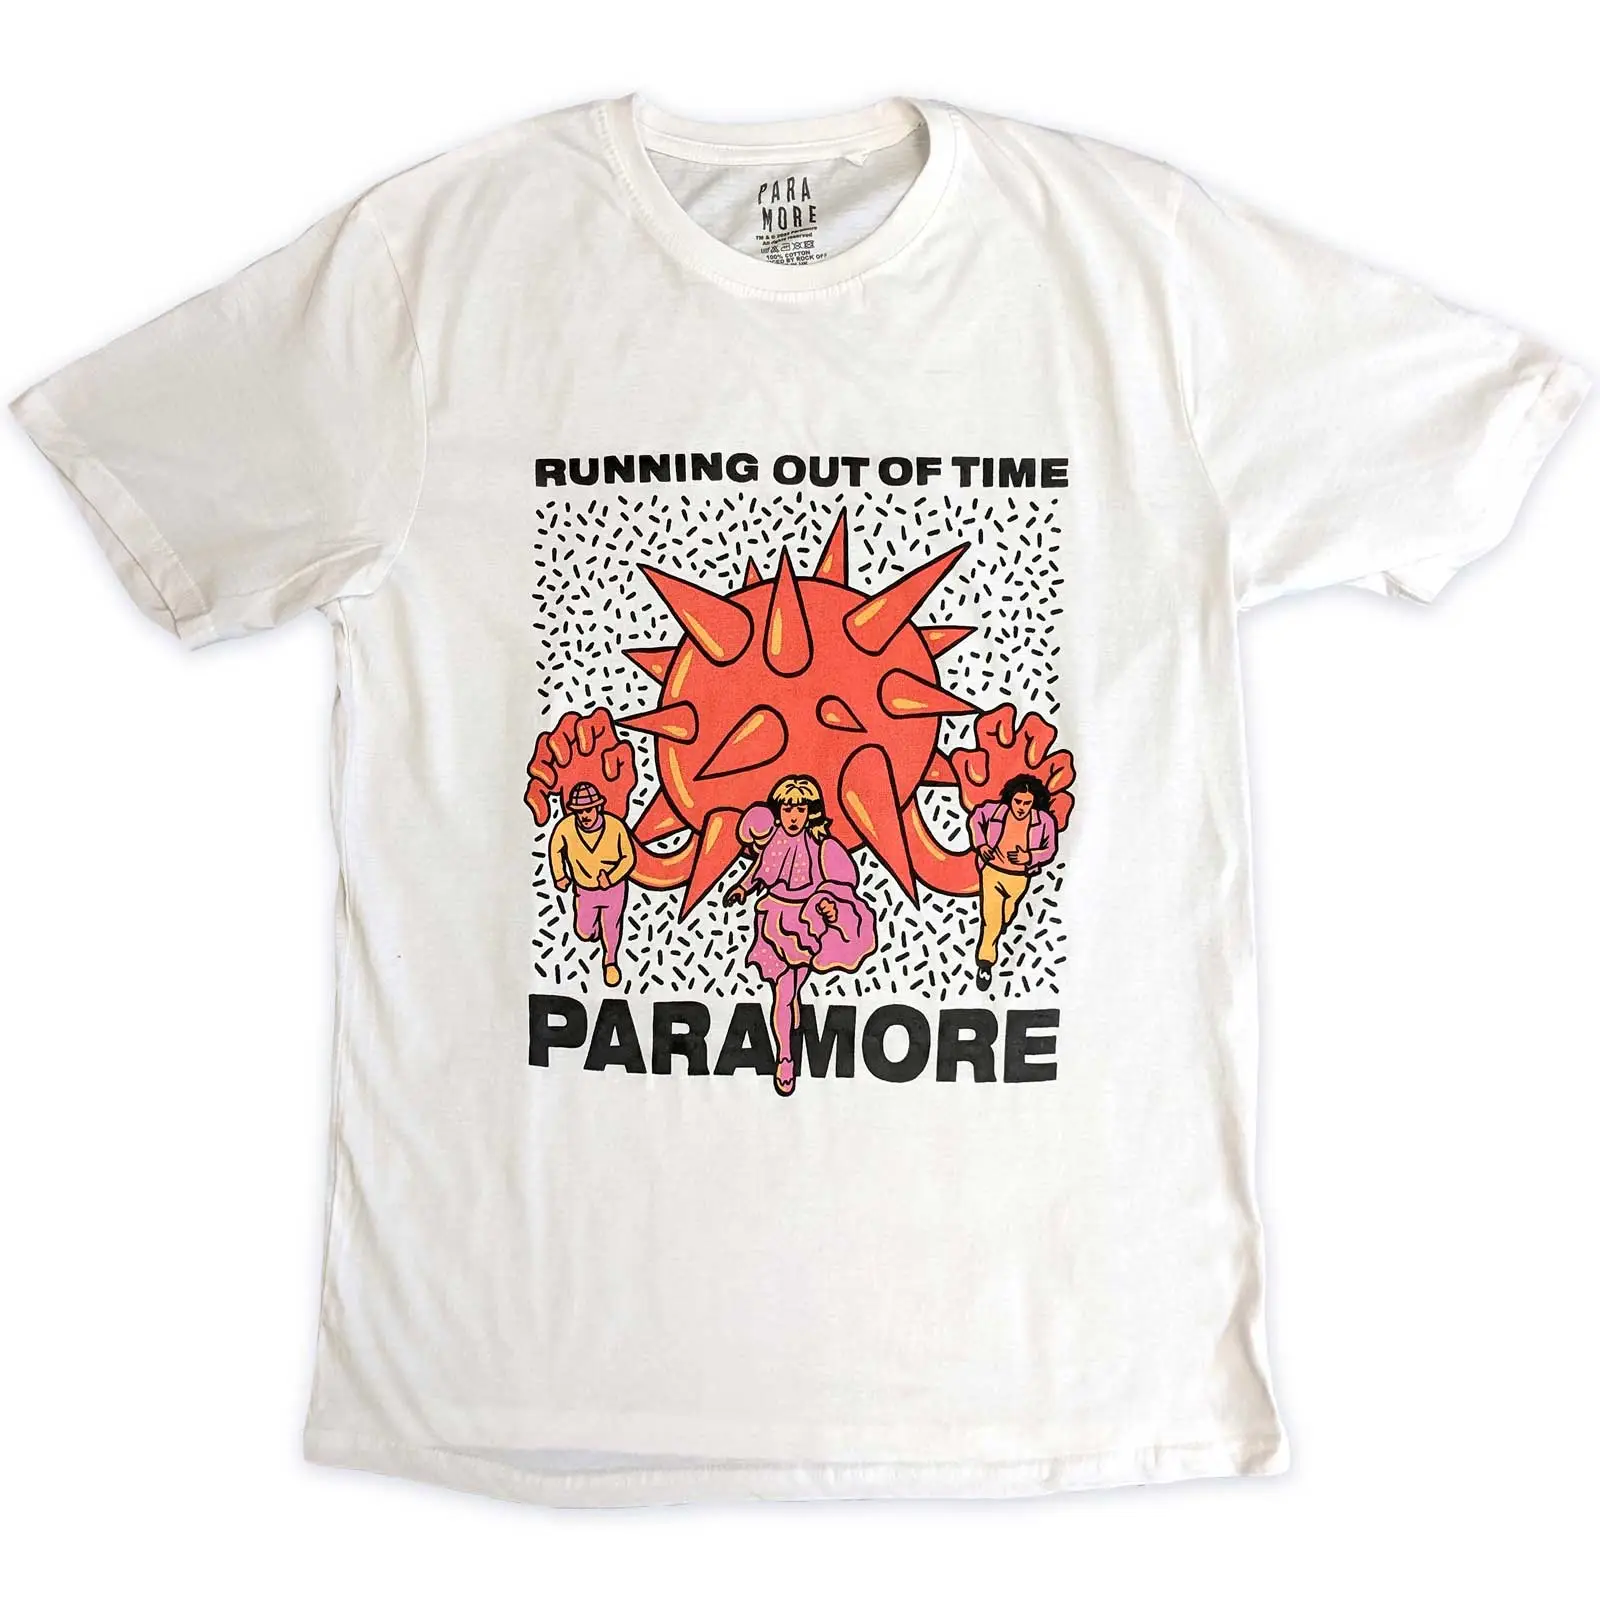 <strong>Paramore - Paramore Unisex T-Shirt: Running Out Of Time  Running Out Of Time Short Sleeves</strong> (Tee shirts - white)